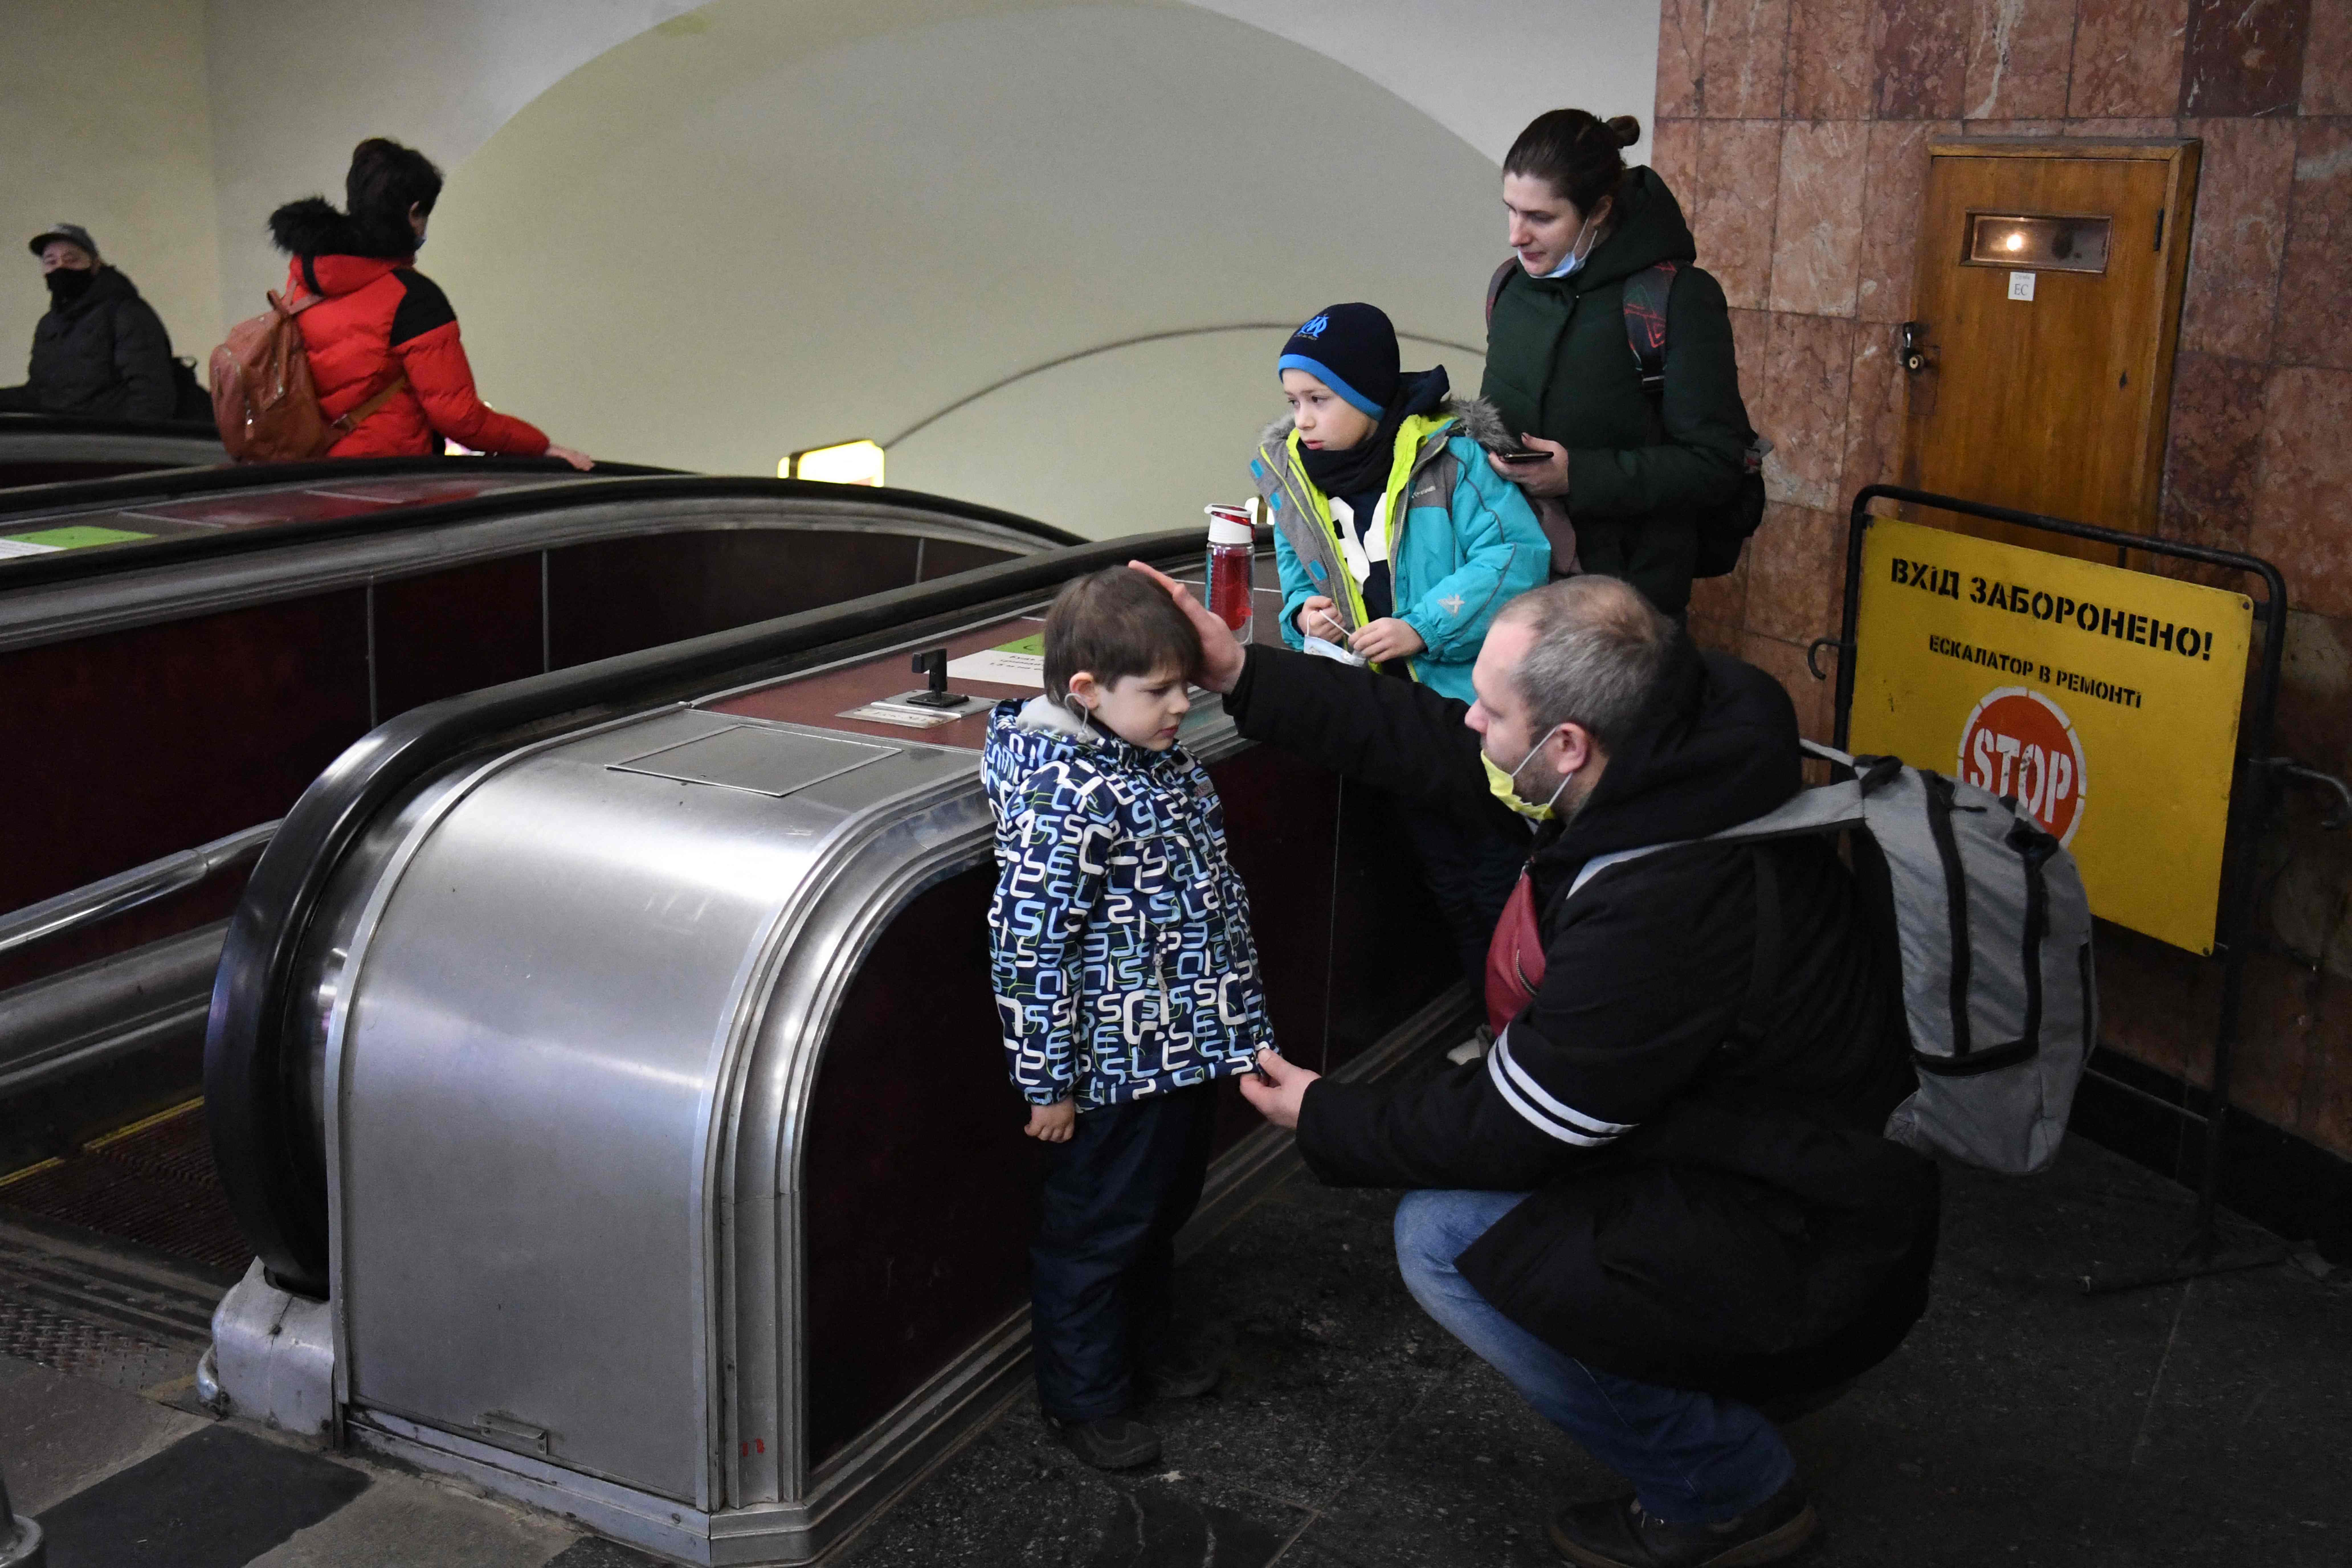 A Ukrainian father reassures his son as the family takes refuge in a metro station in Kiev